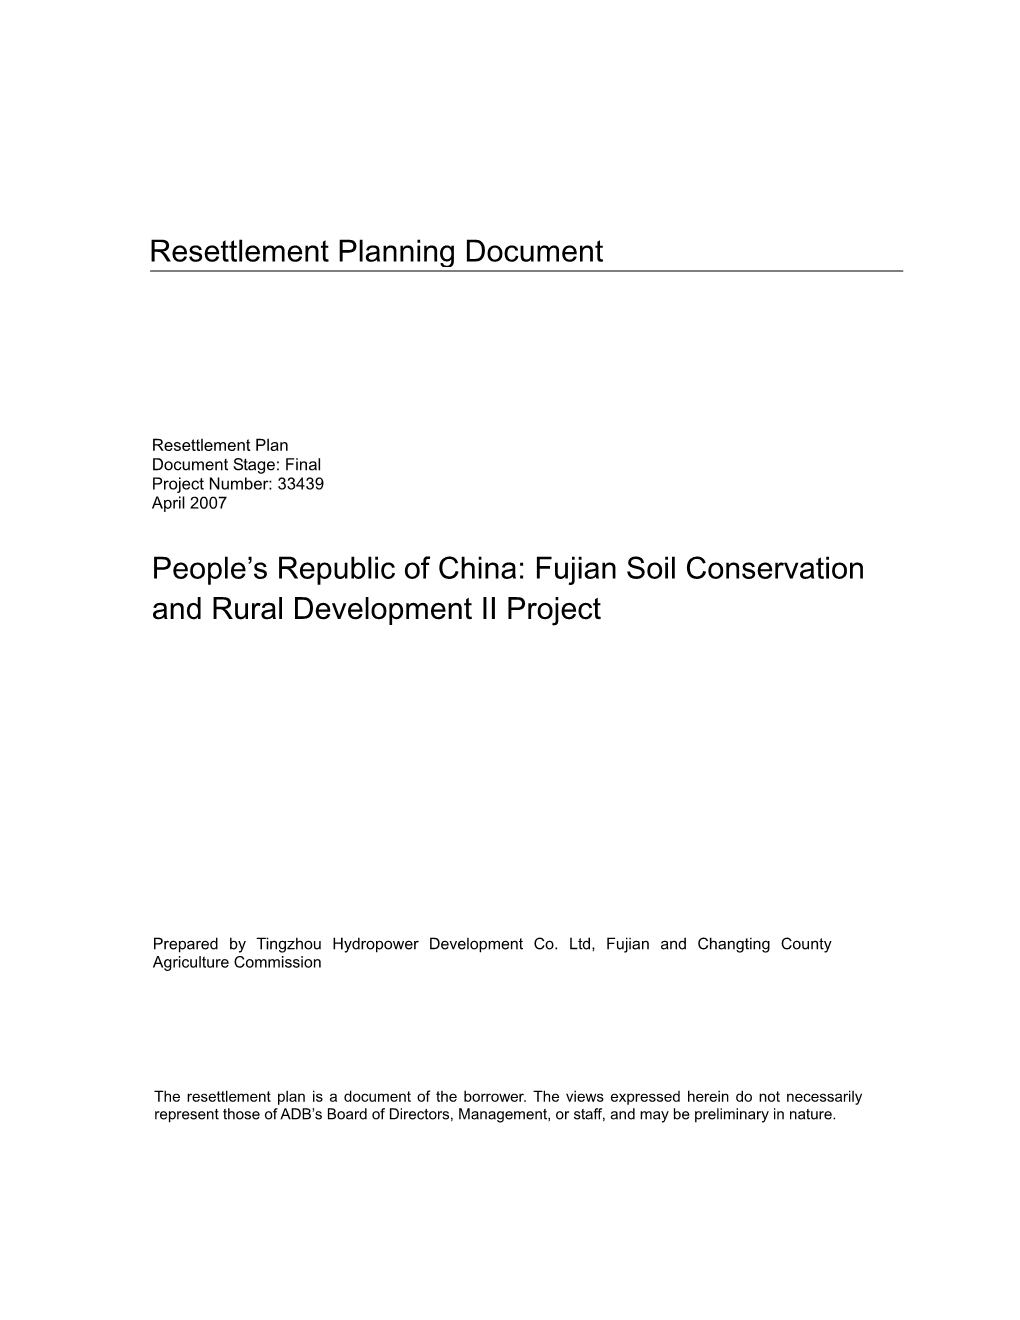 Fujian Soil Conservation and Rural Development II Project